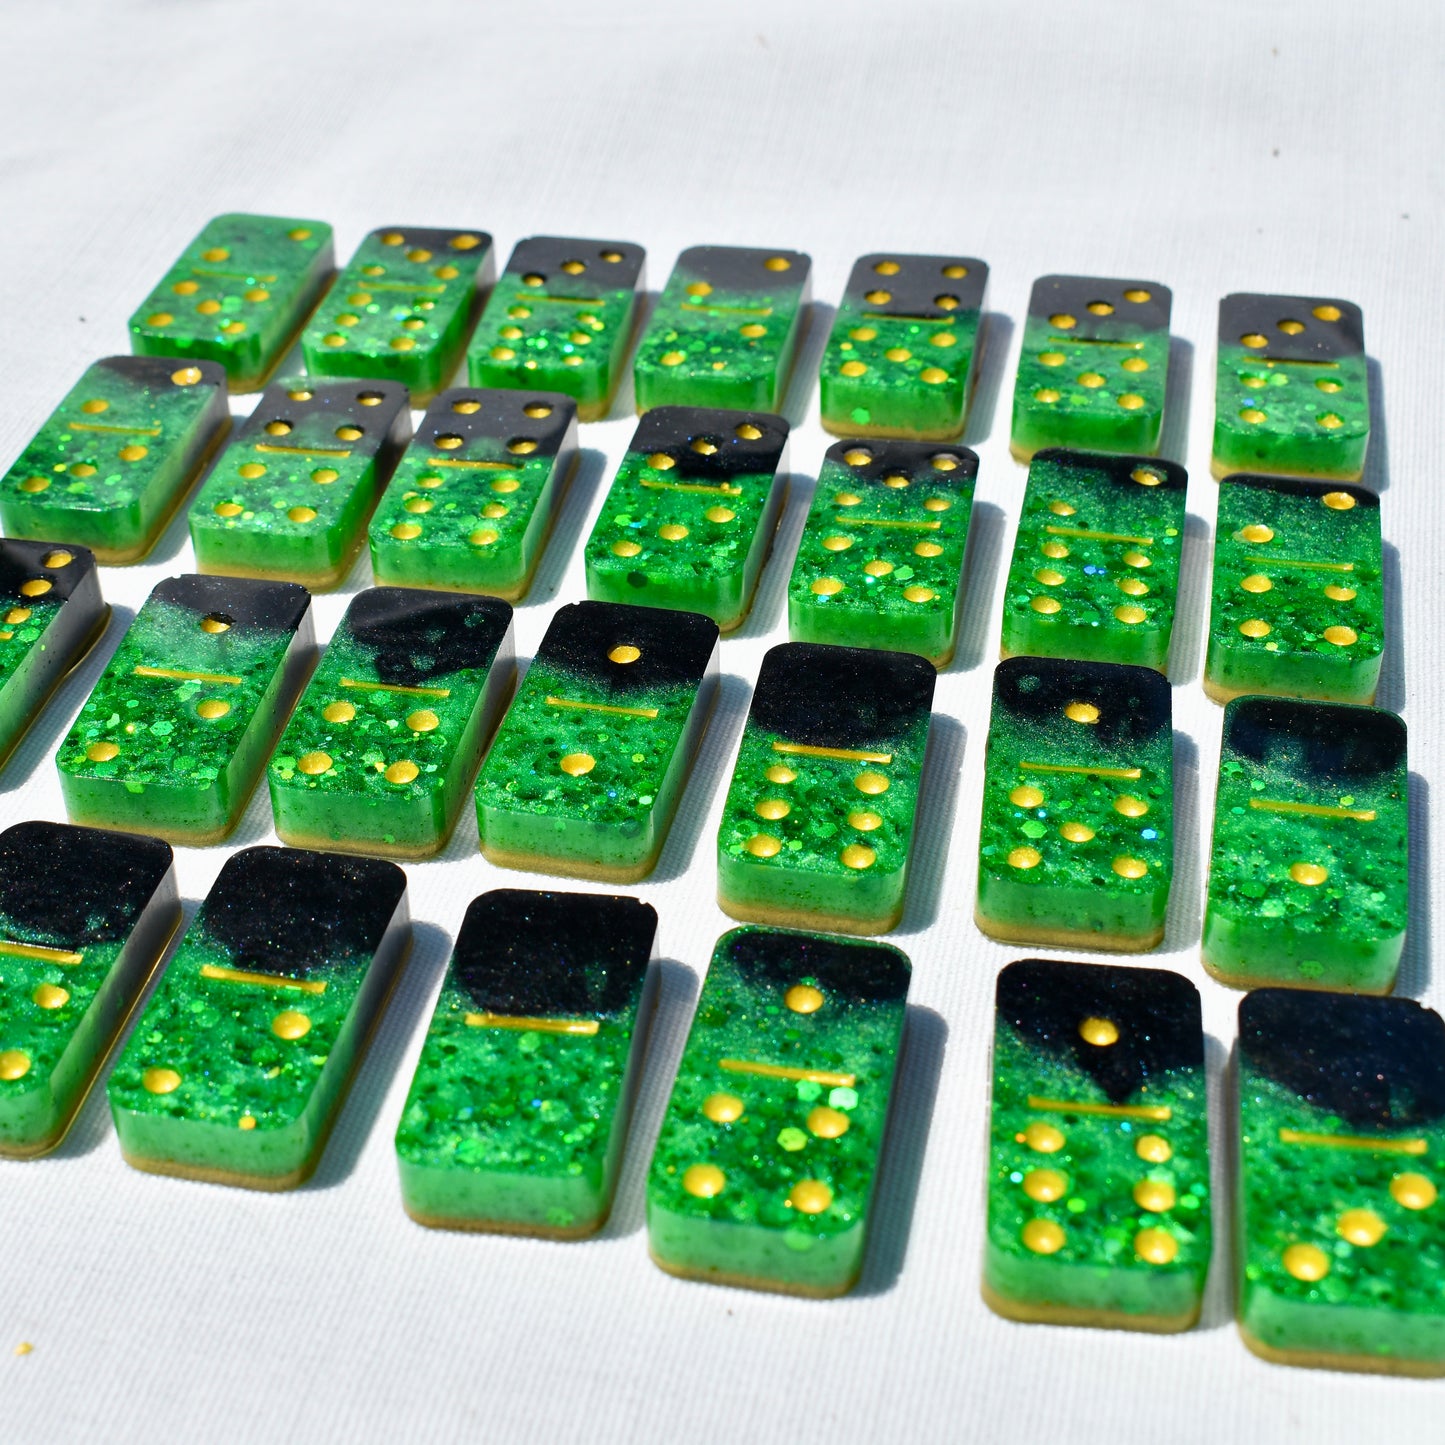 Jamaican Themed Dominoes • Jamaican Flag Dominos • Double Six Dominos Set